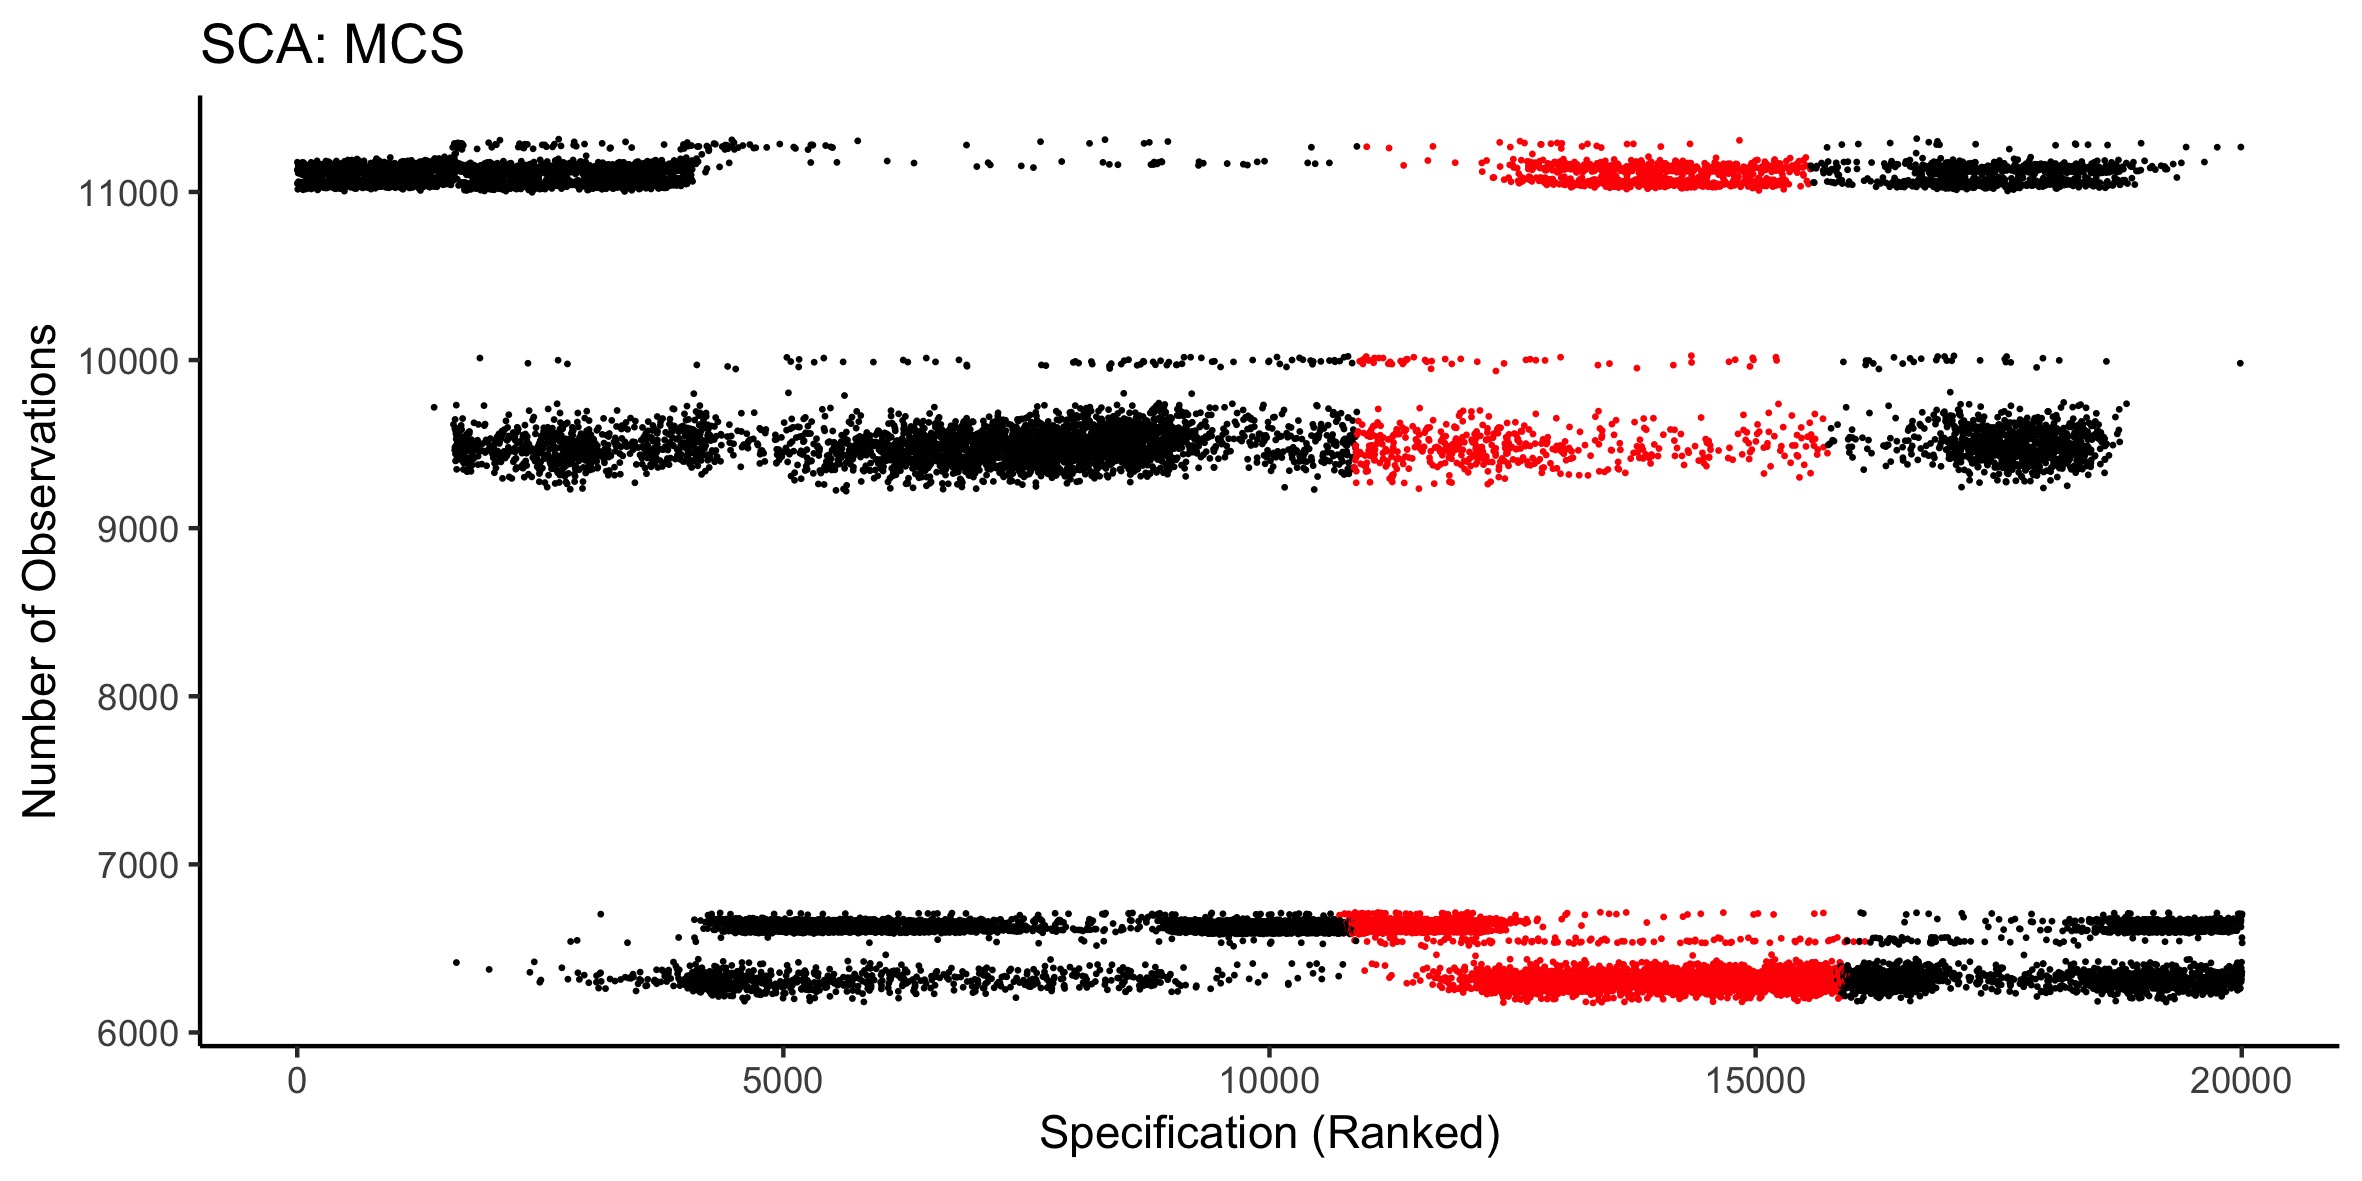 Number of observations (participants) for each specification analysed in the MCS SCA. Red dots indicate when the specification was non-significant, while black dots show significant specifications.